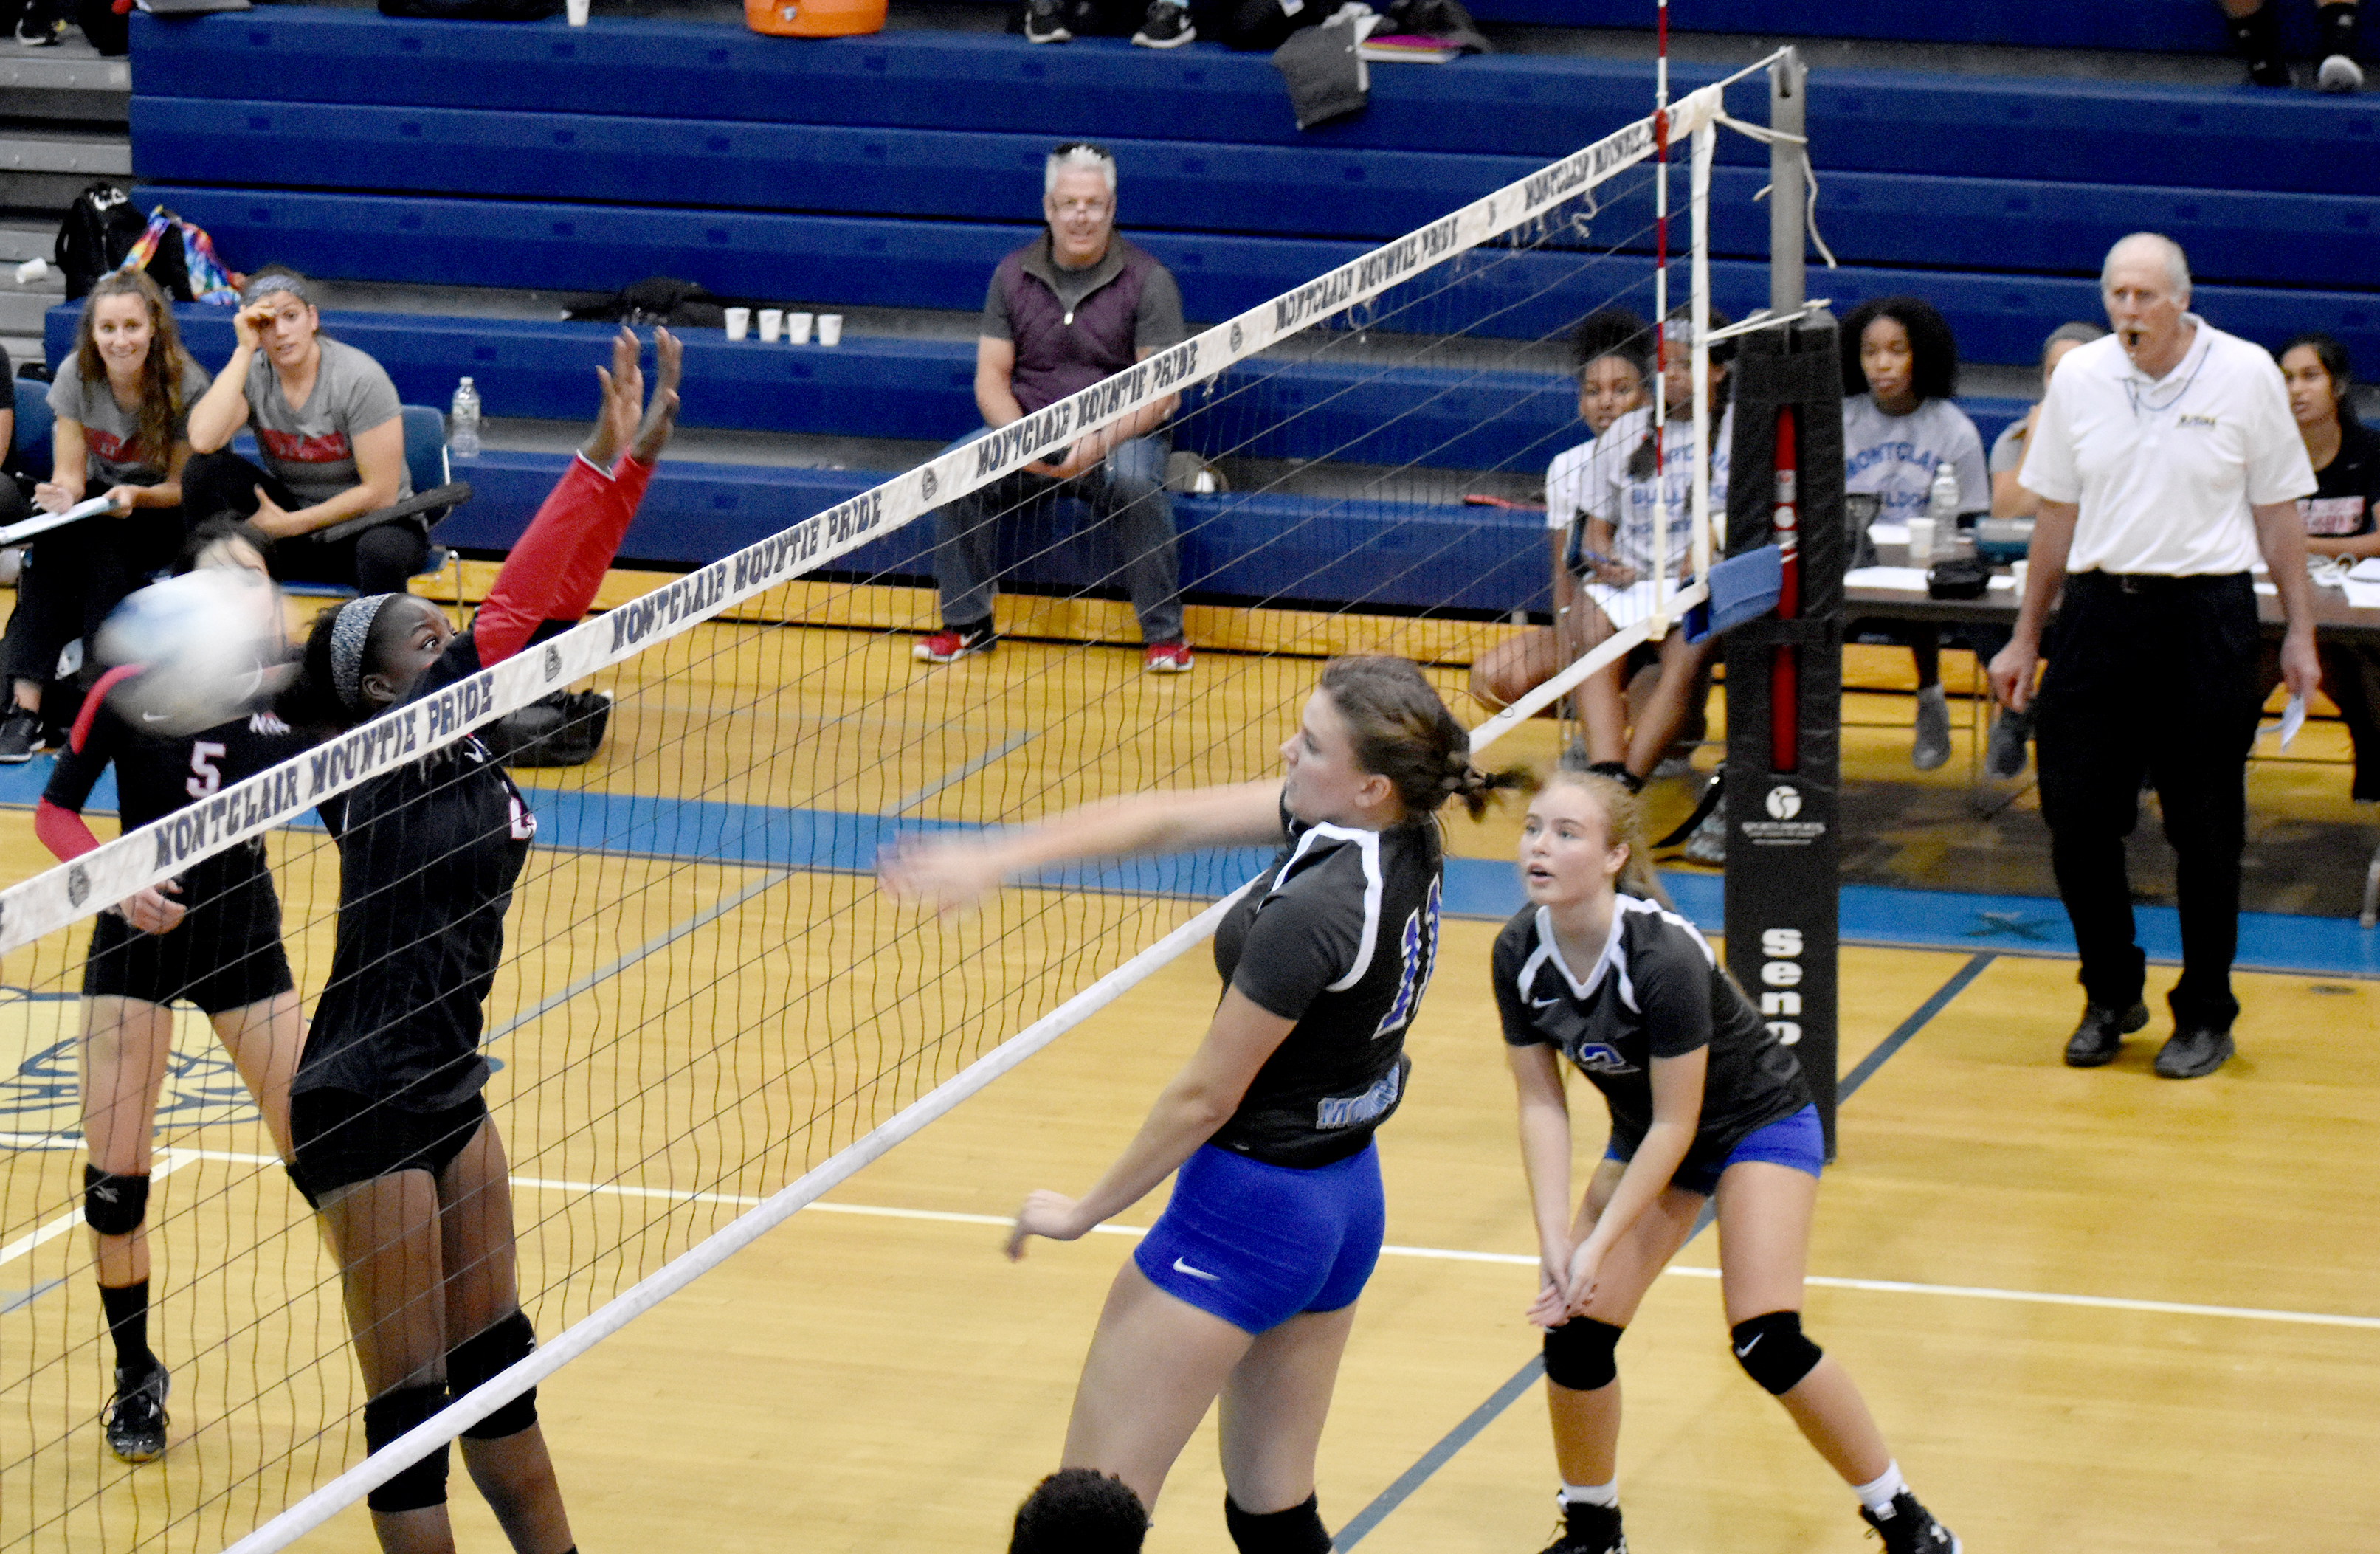 Volleyball: Mounties beat Newark Academy in second meeting, 2-0